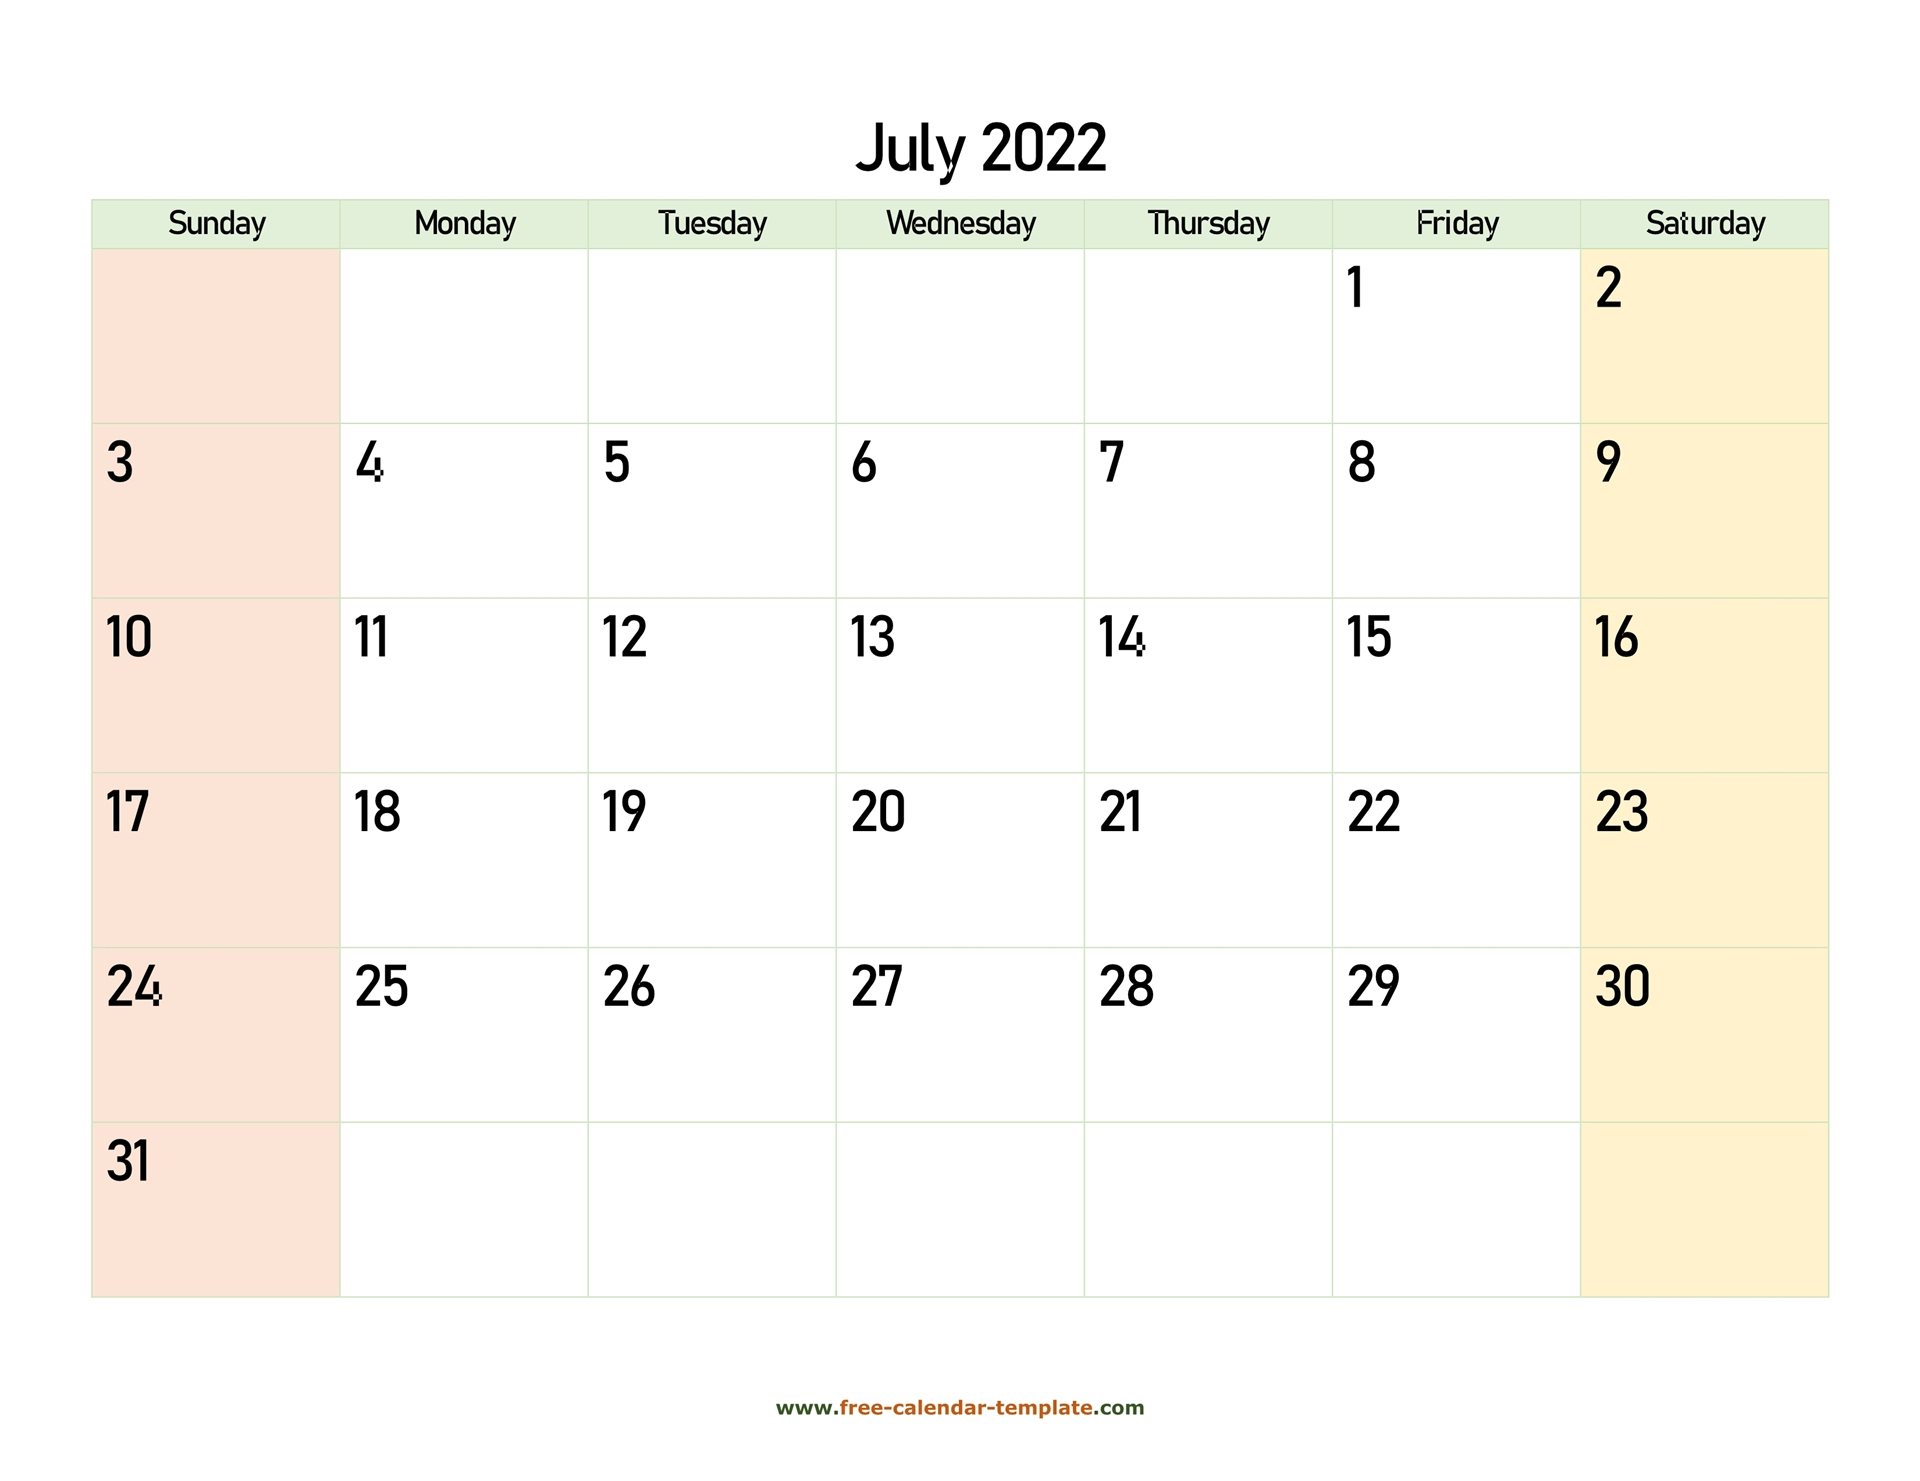 Collect Calendar Of July 2022